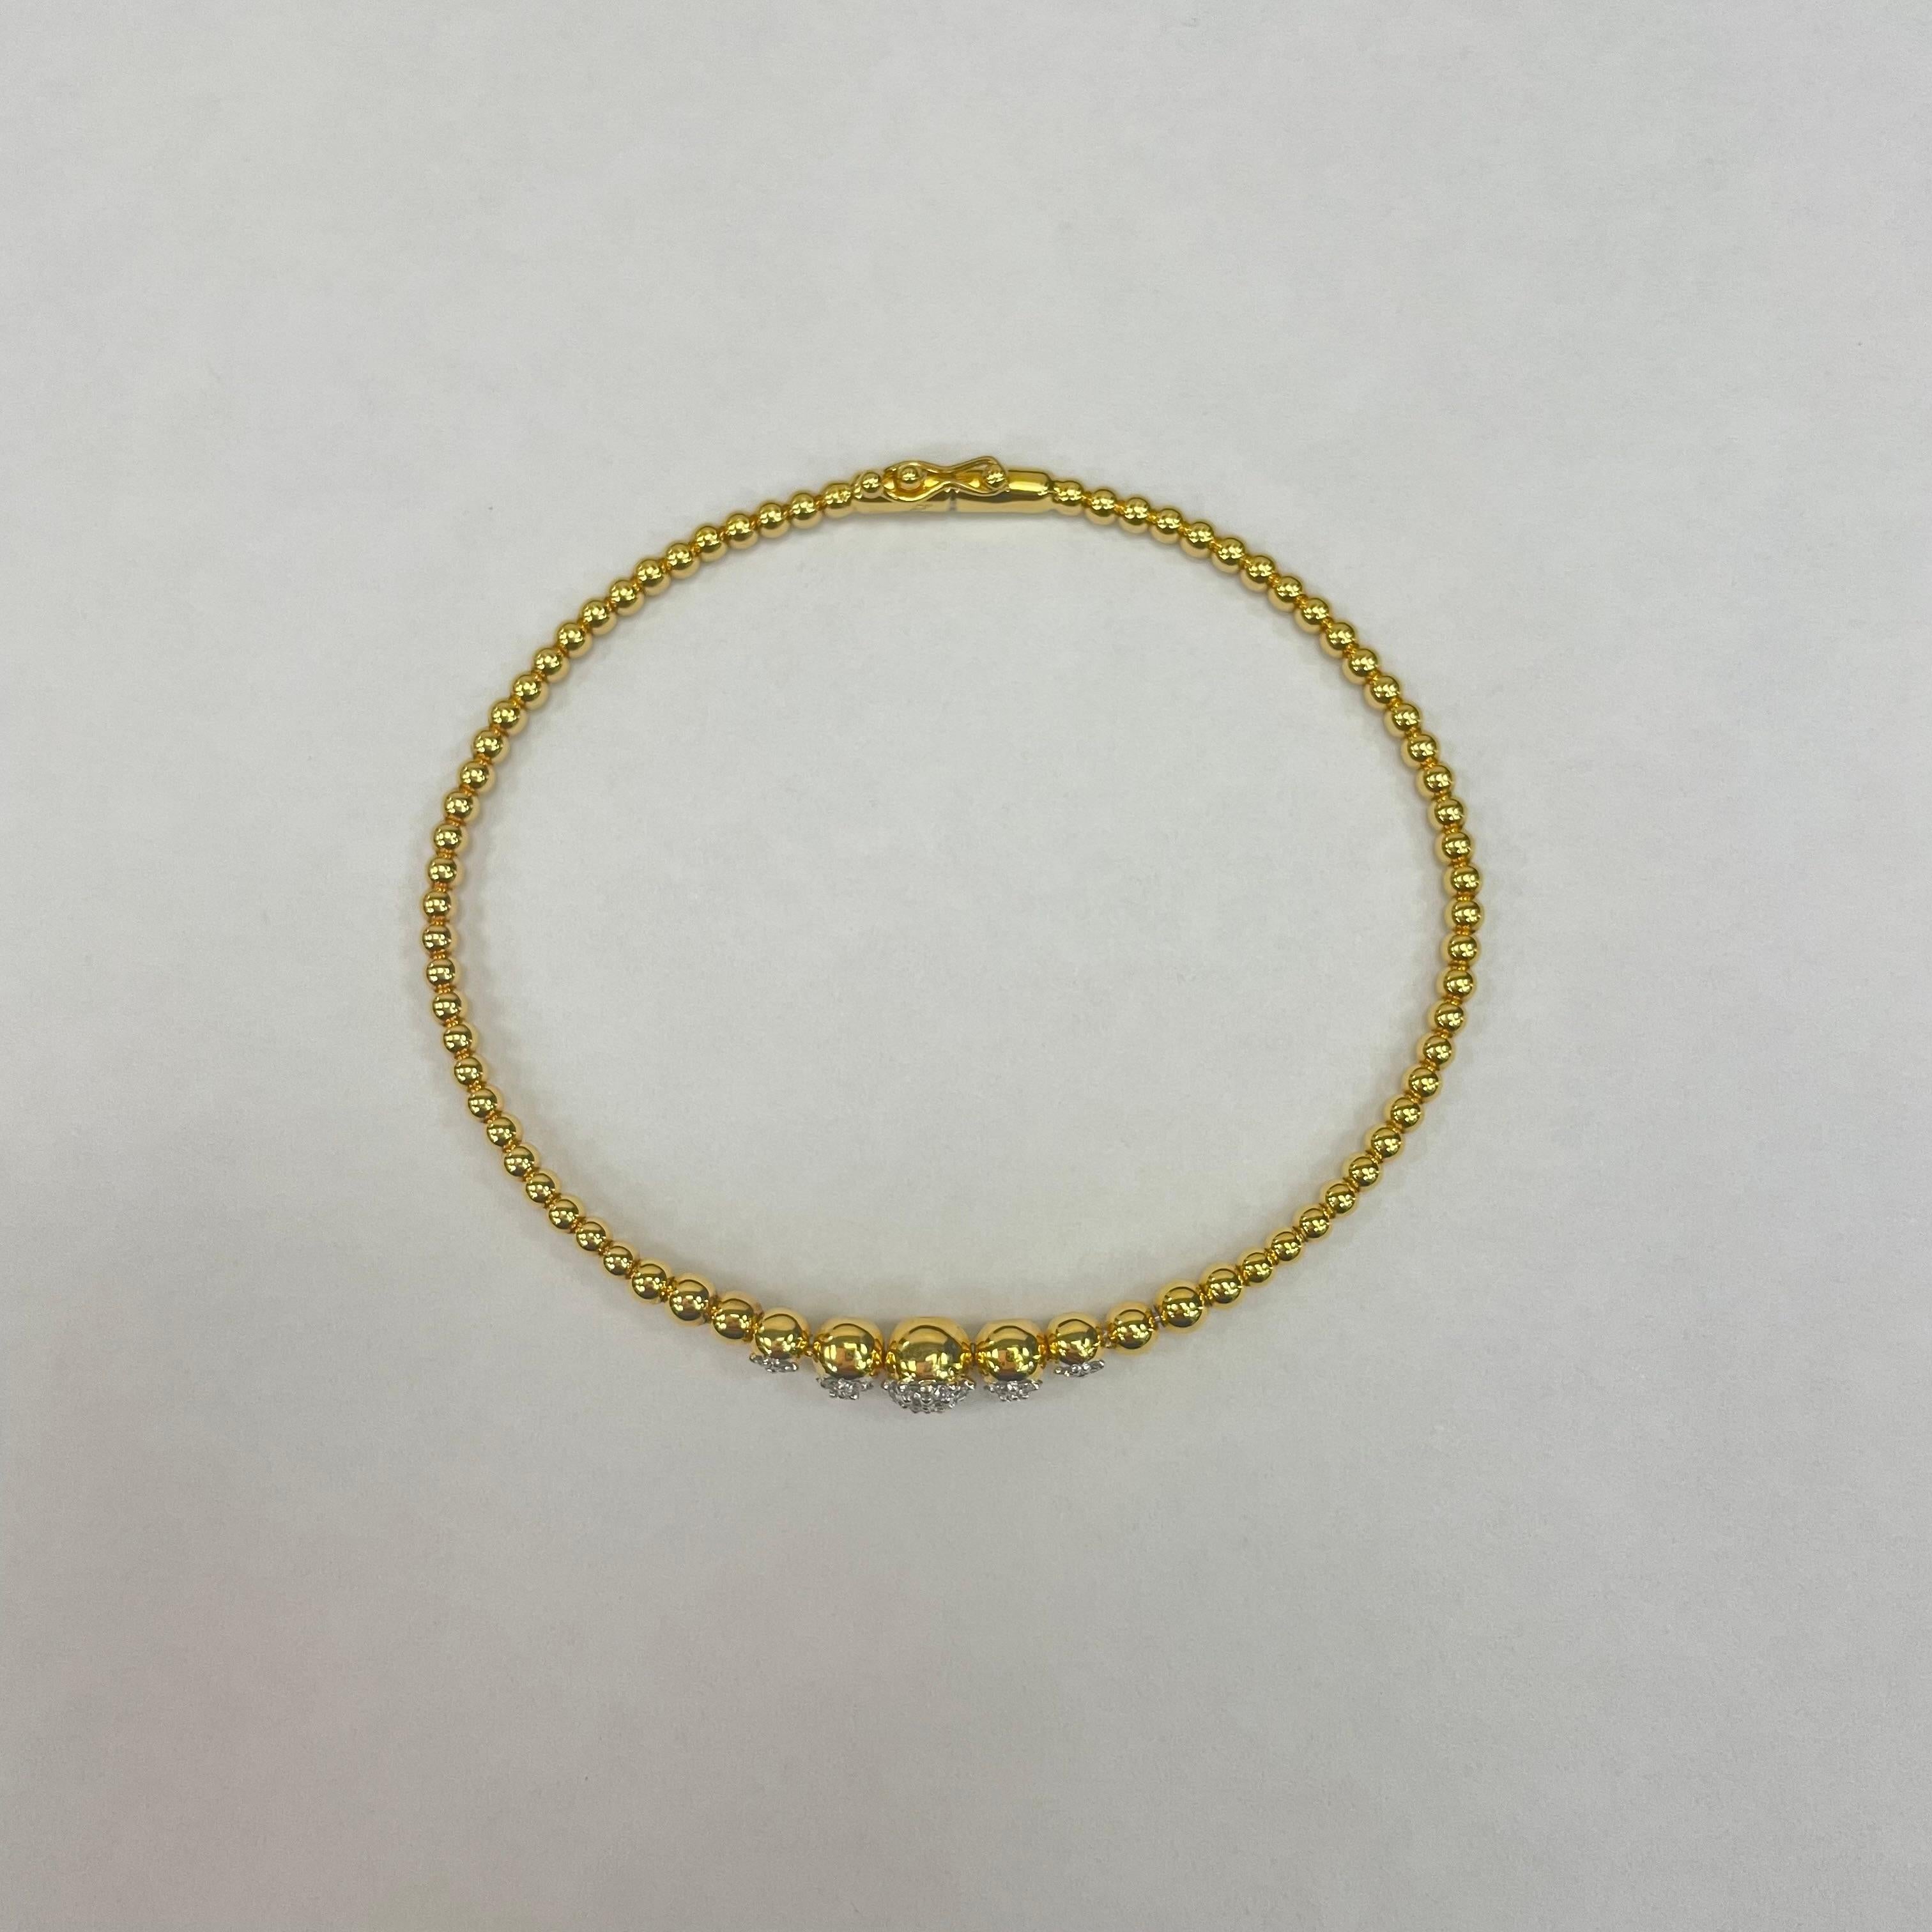 This beautiful yellow gold bangle is the perfect everyday jewellery . Featuring five pieces diamond bead, weighing 0.19 carats, totalling 39 pieces of brillant cut round diamonds. Made in 18K yellow gold.